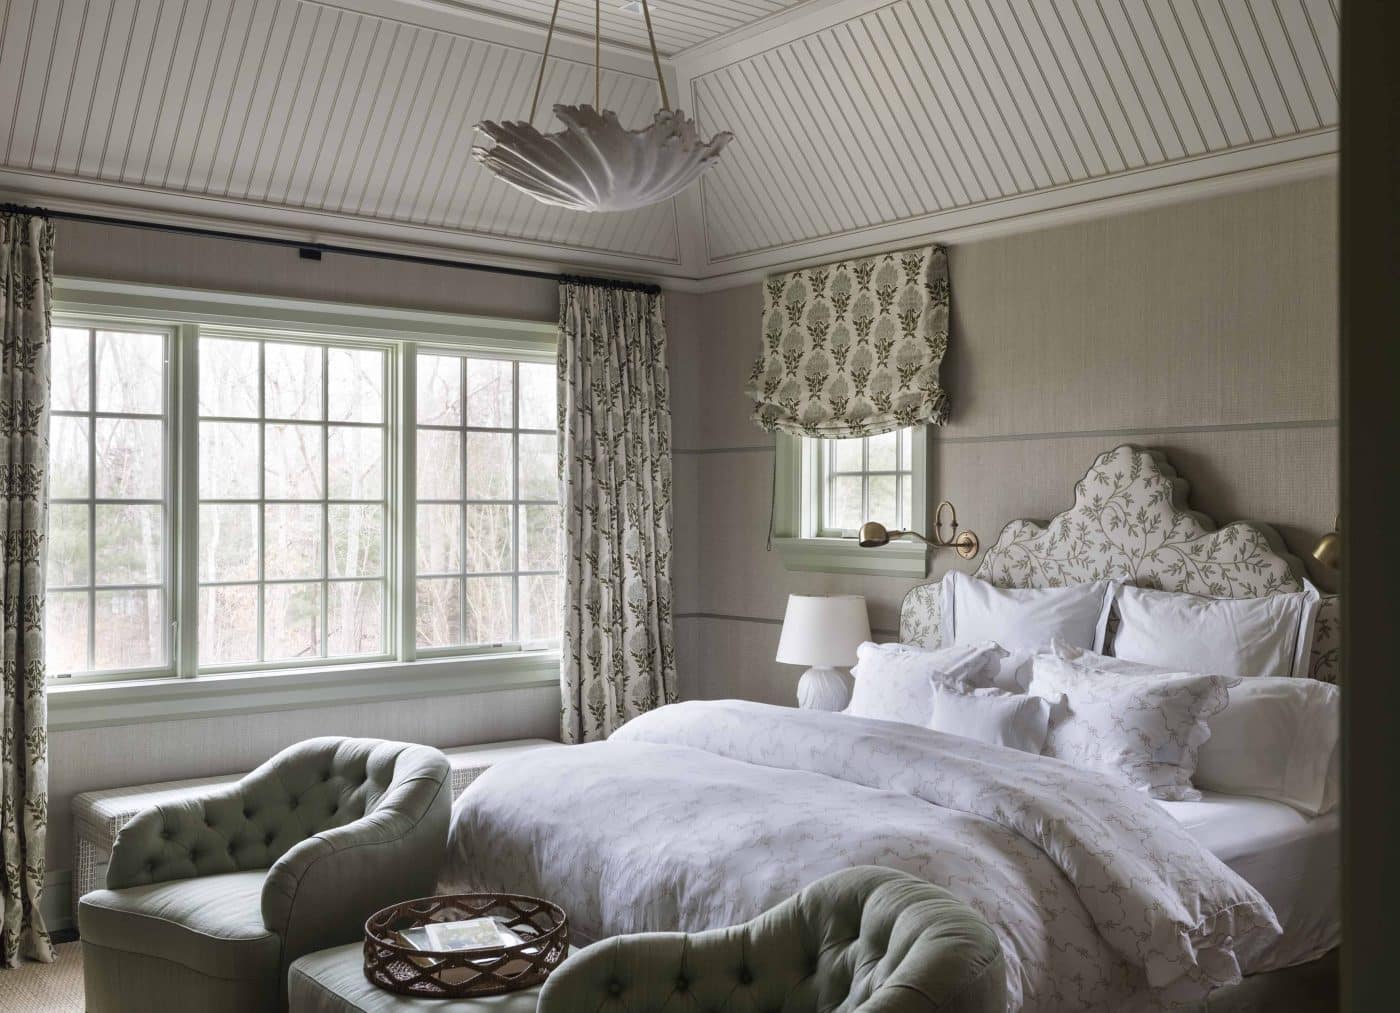 Primary bedroom in the Robert Couturier-designed Hamptons house.